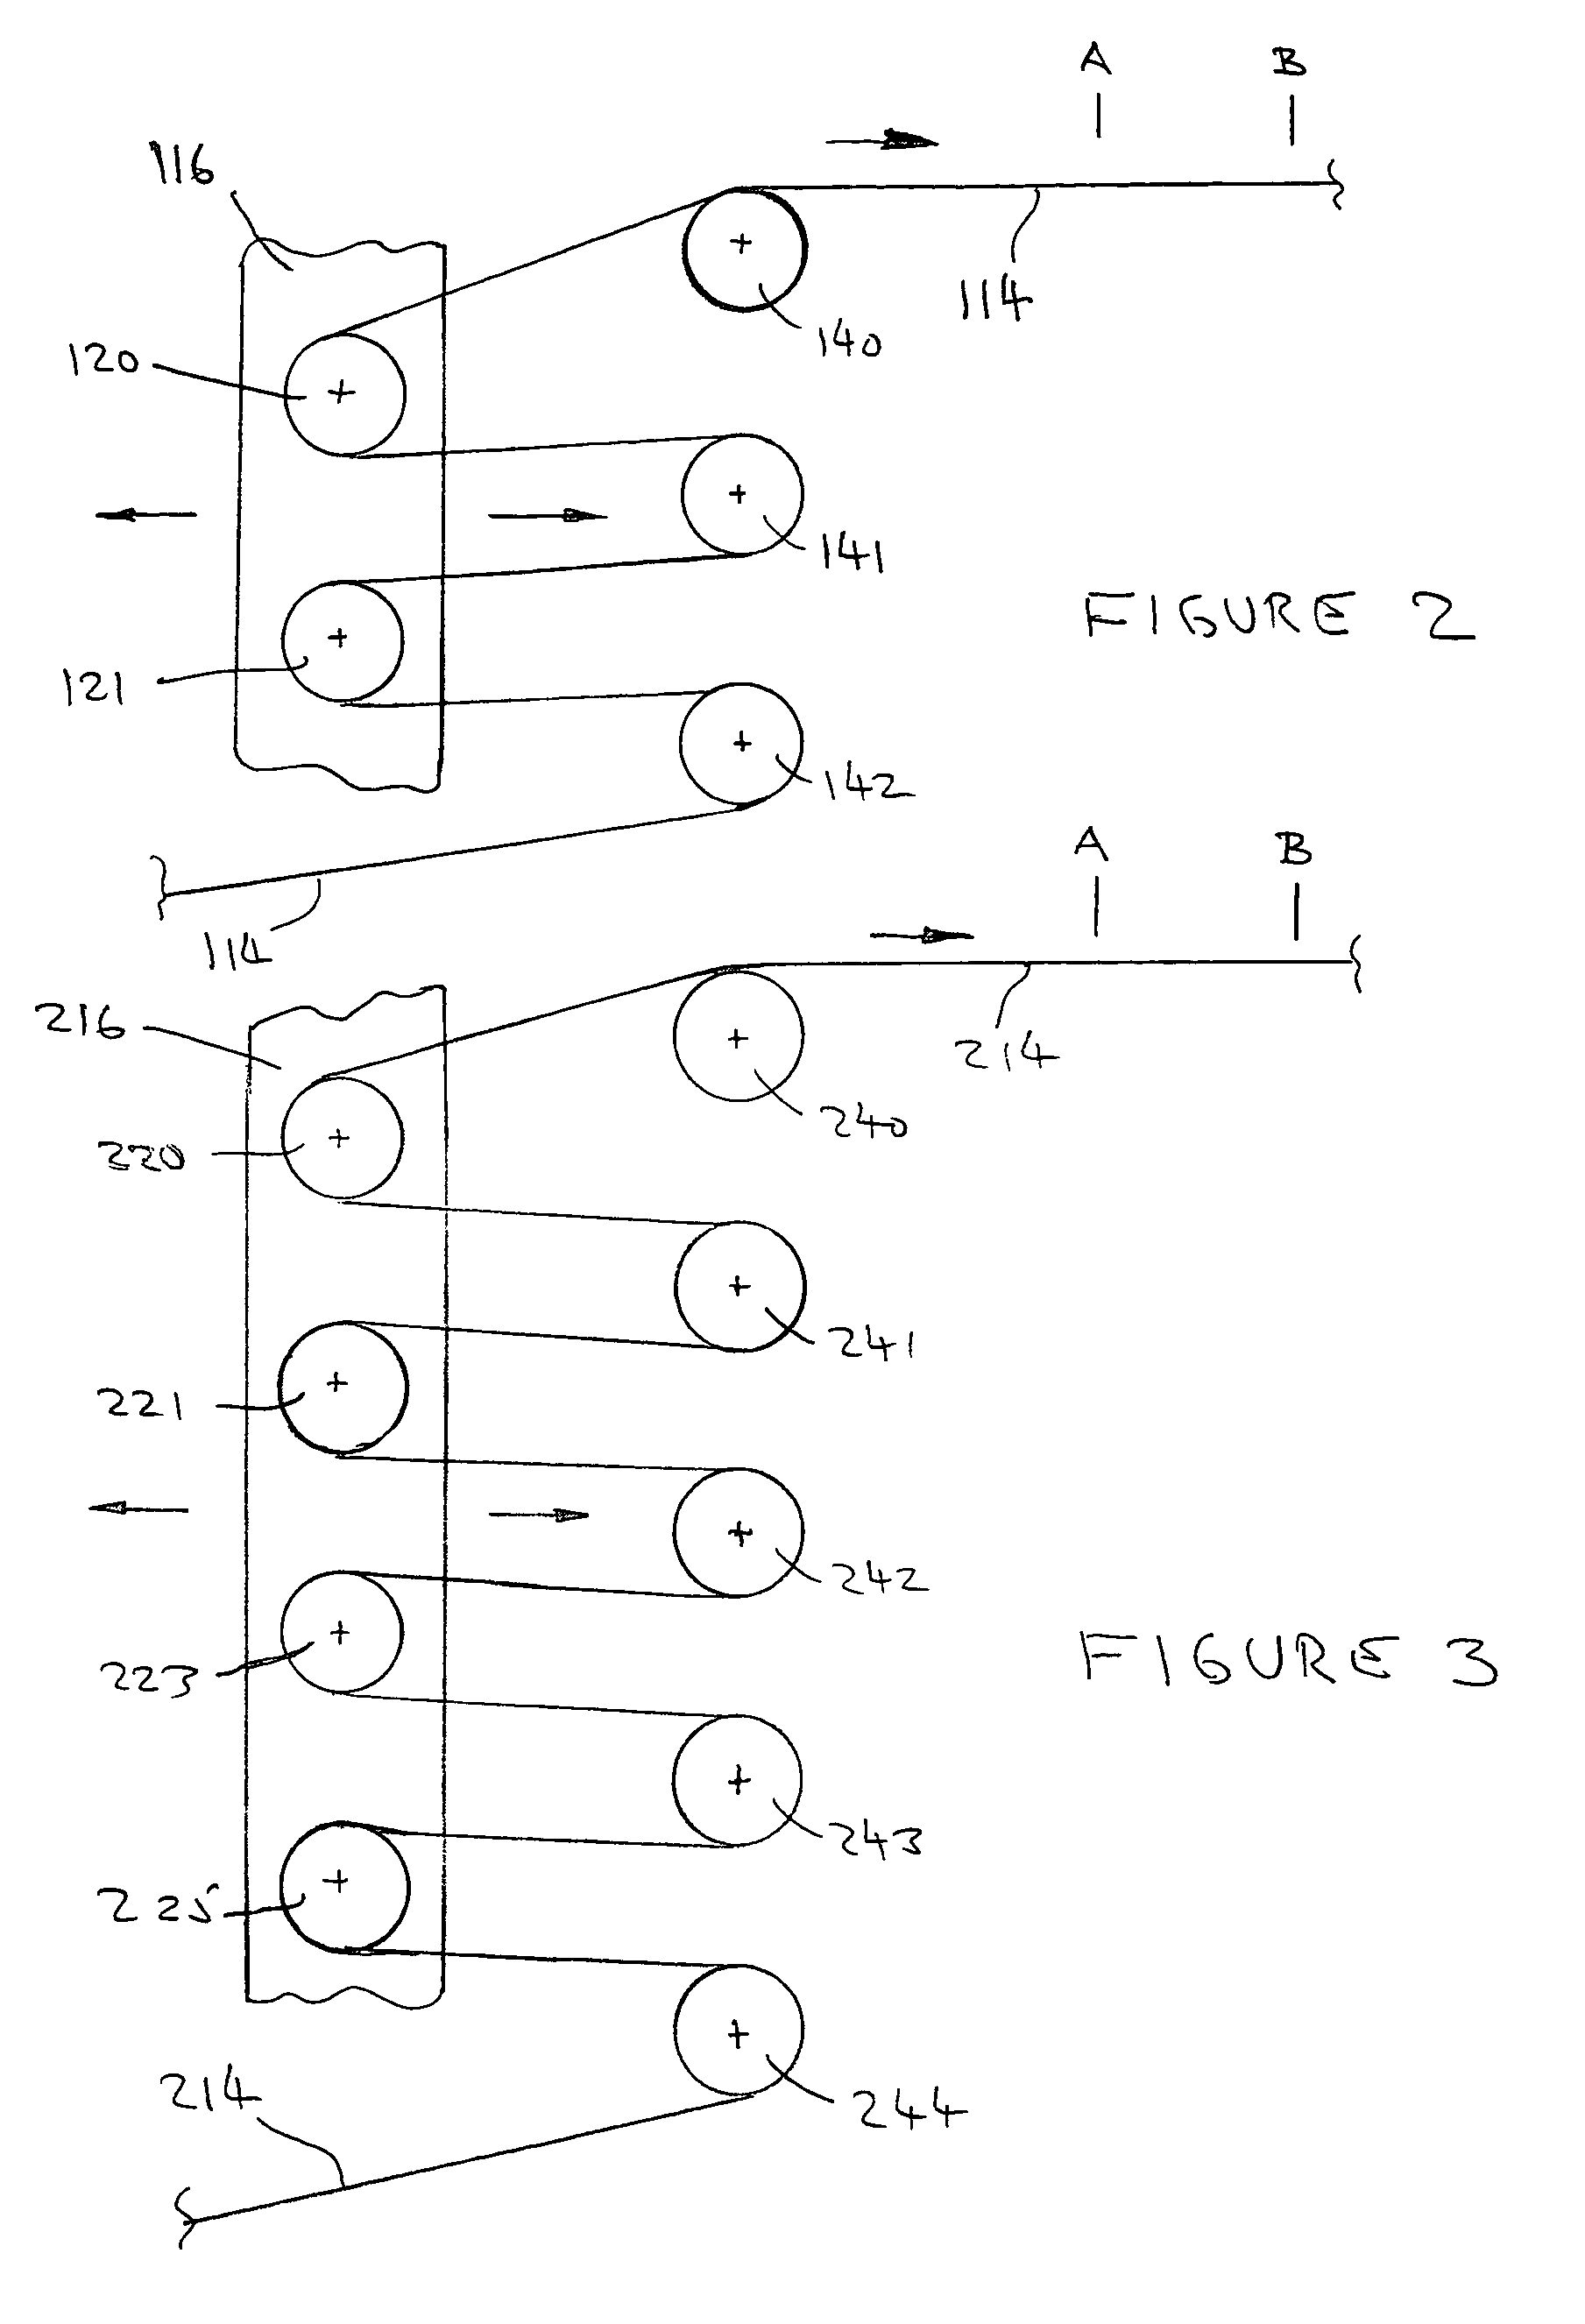 Web tensioning device with plural control inputs